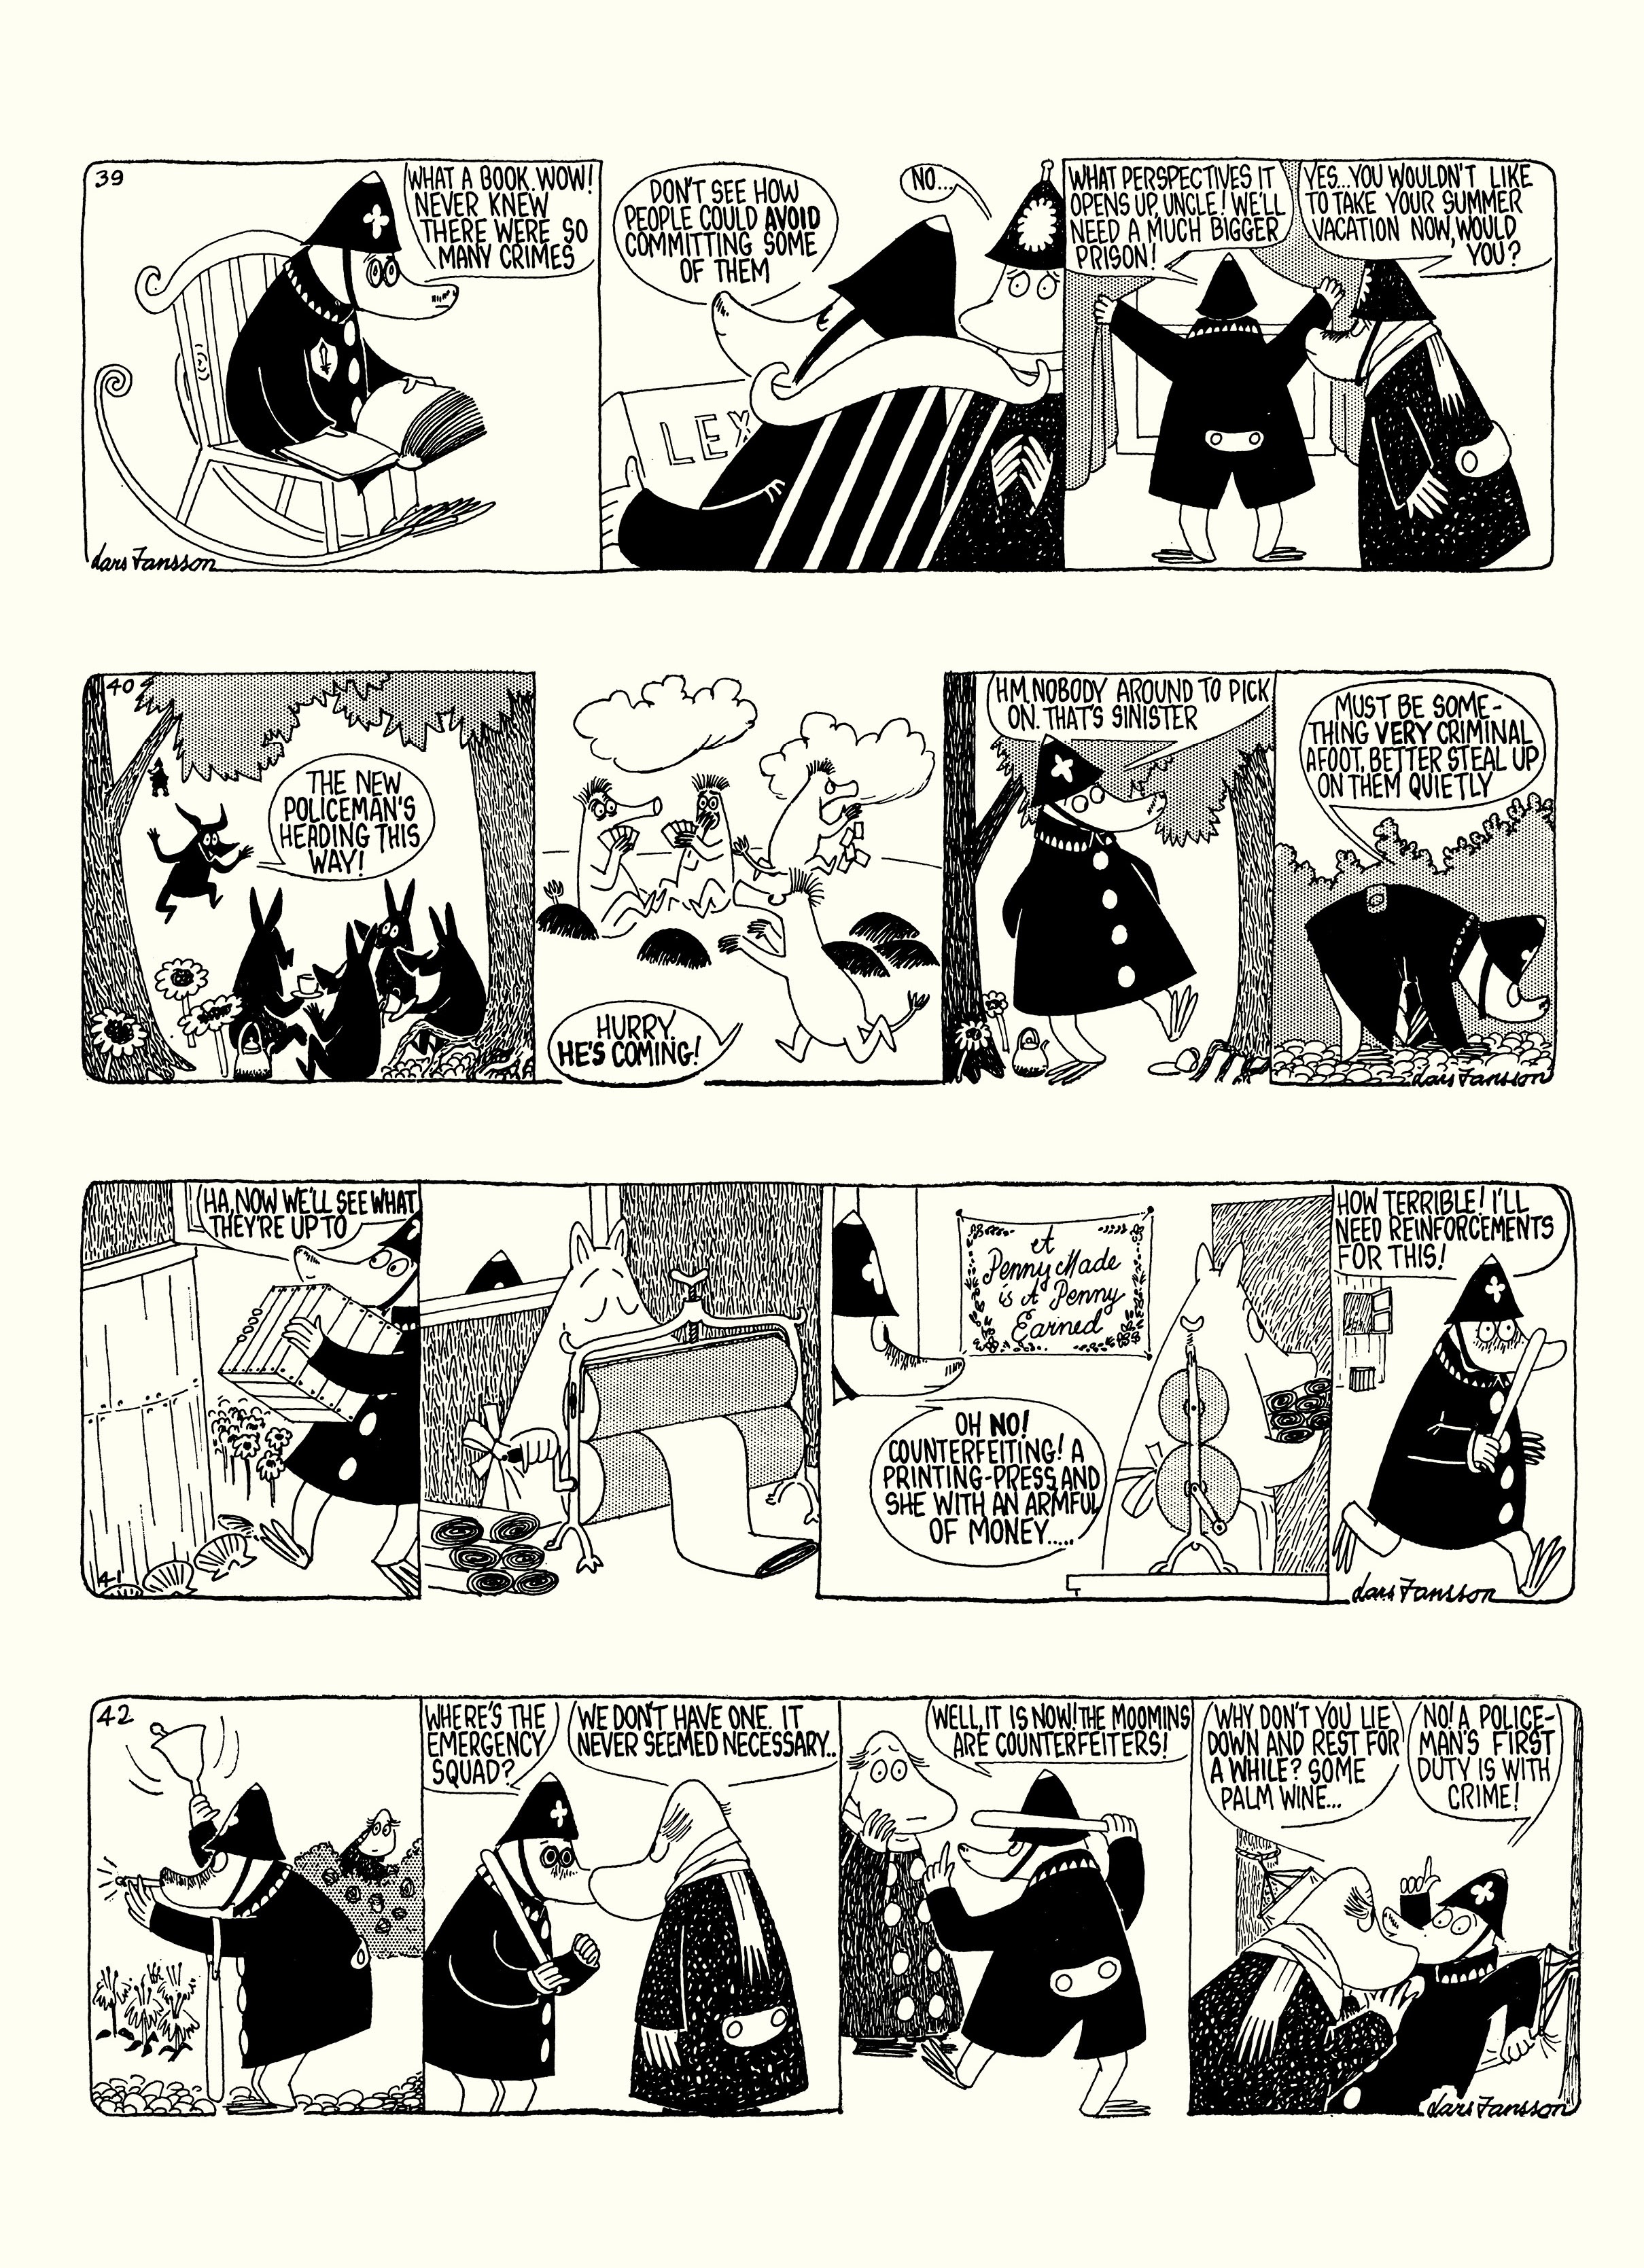 Read online Moomin: The Complete Lars Jansson Comic Strip comic -  Issue # TPB 8 - 81